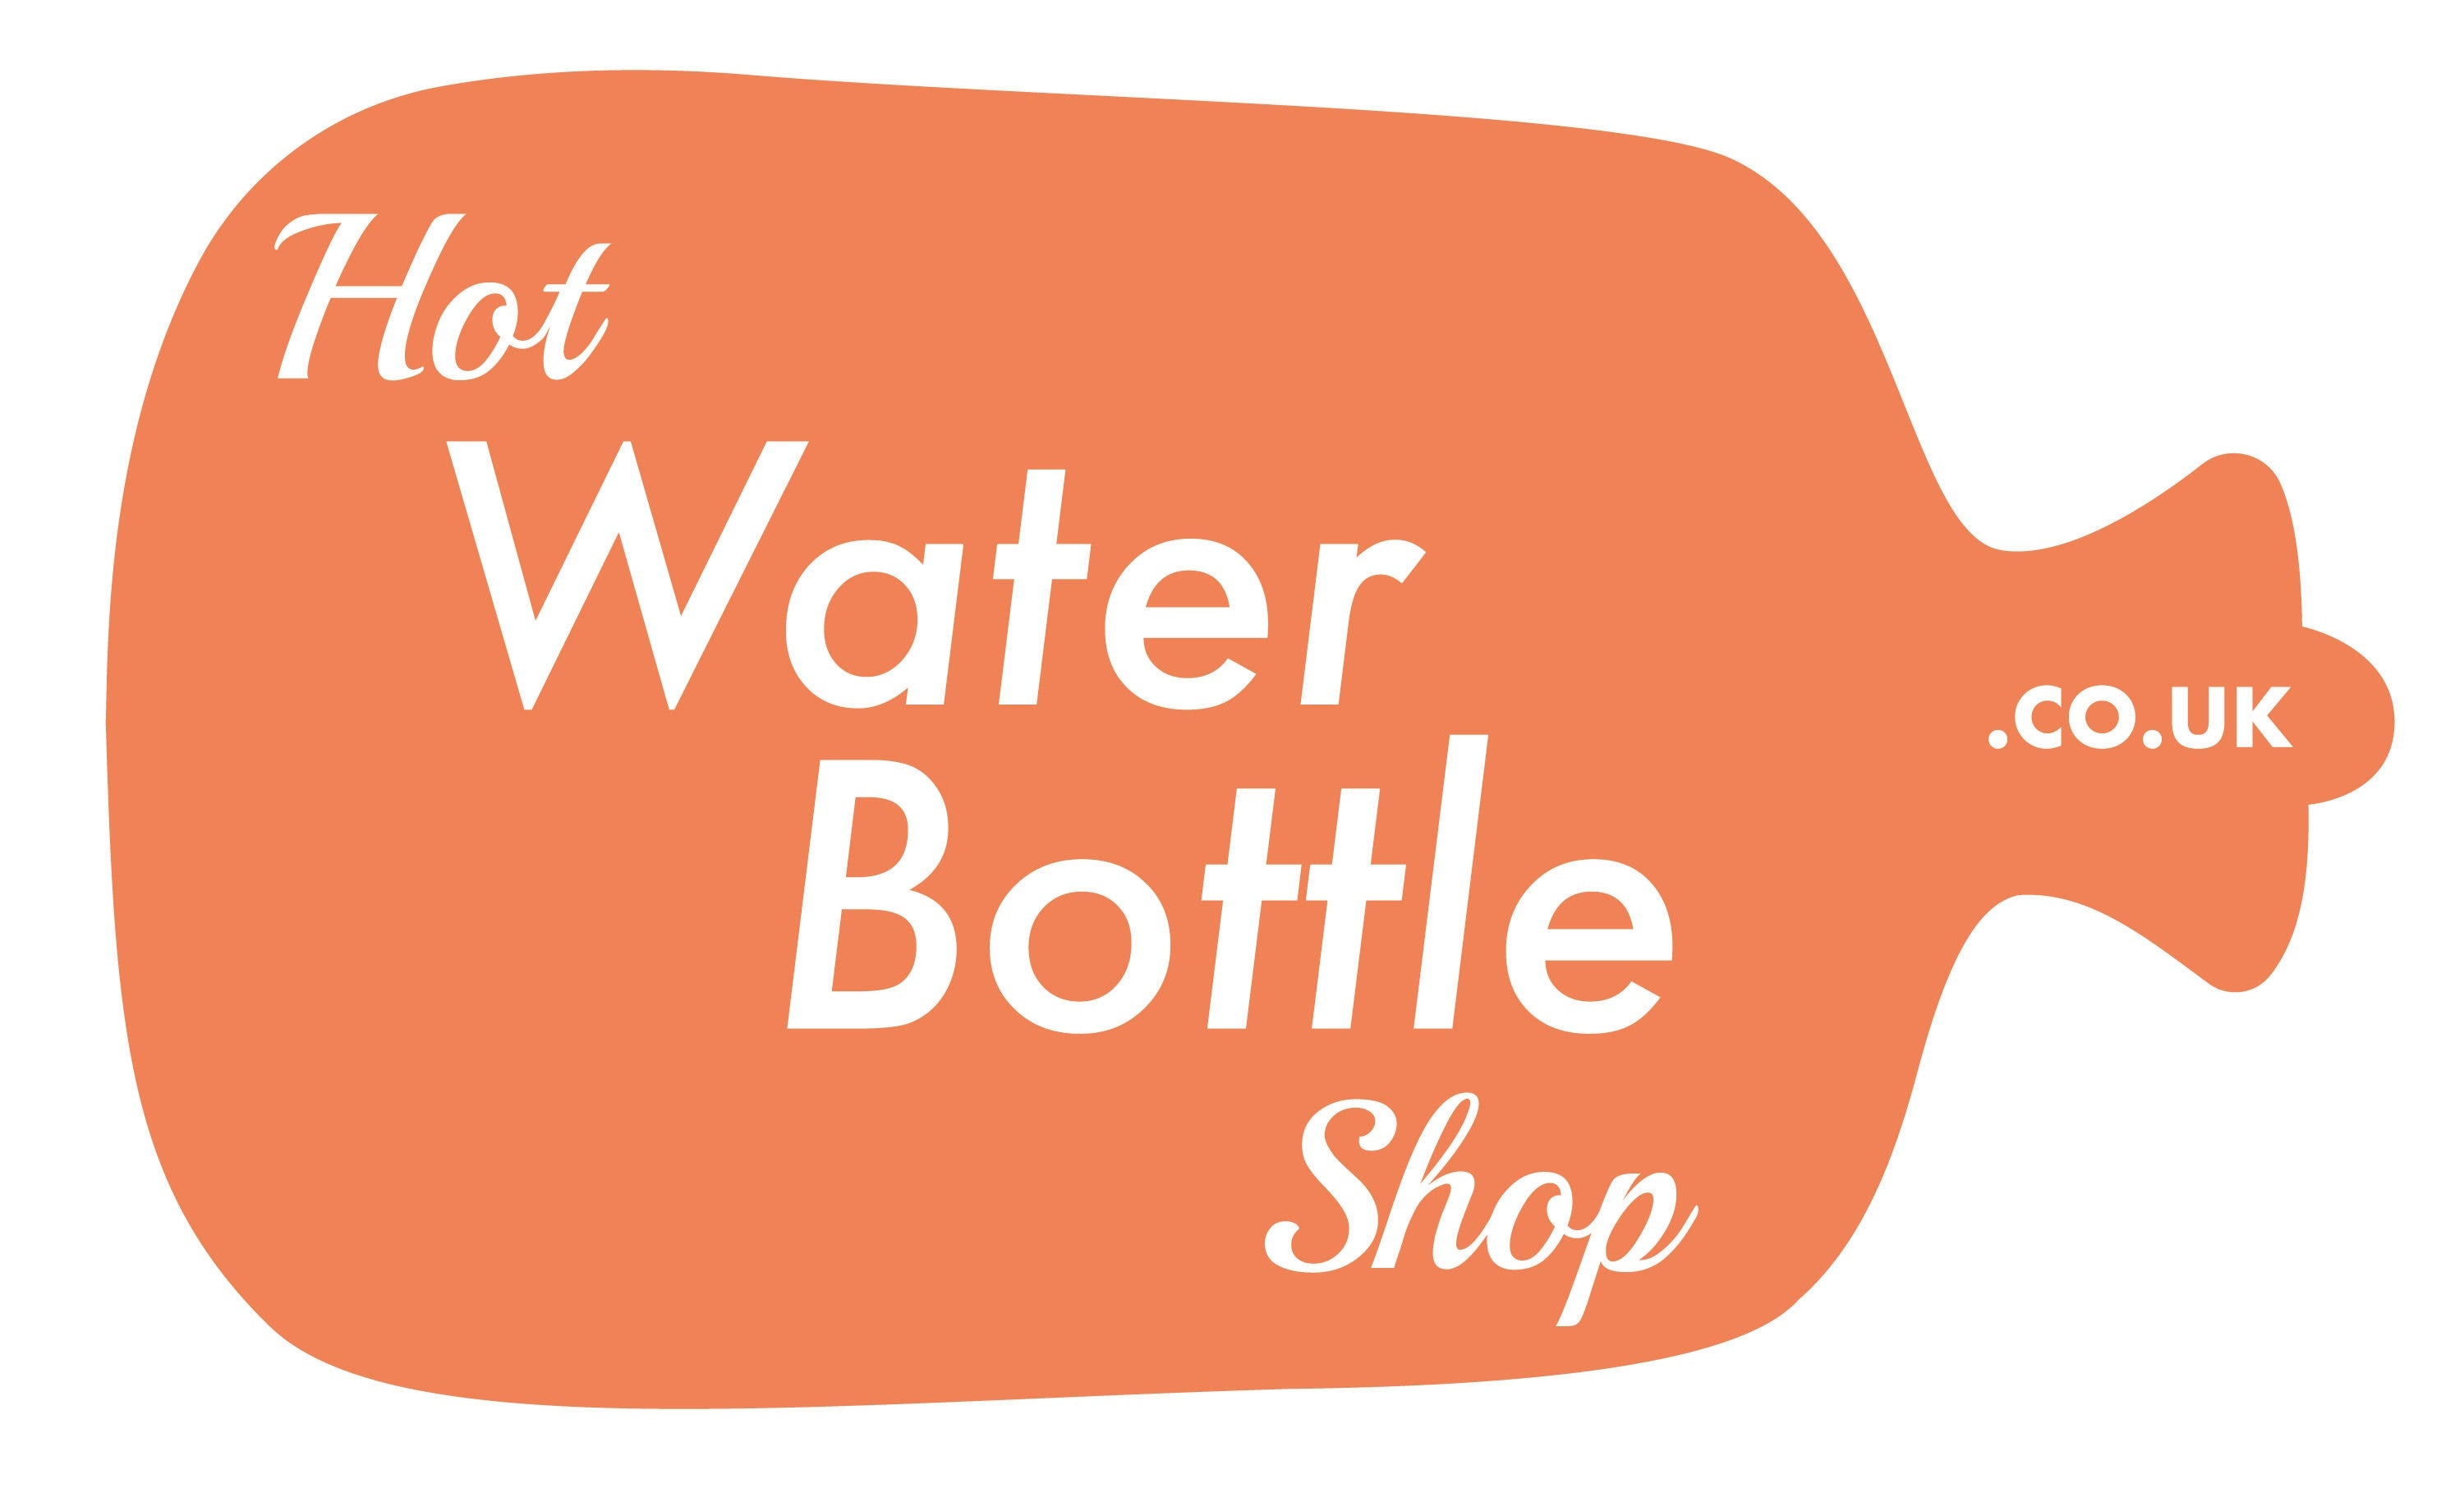 An Uncomplicated Life Blog: 5 Best Water Bottles On